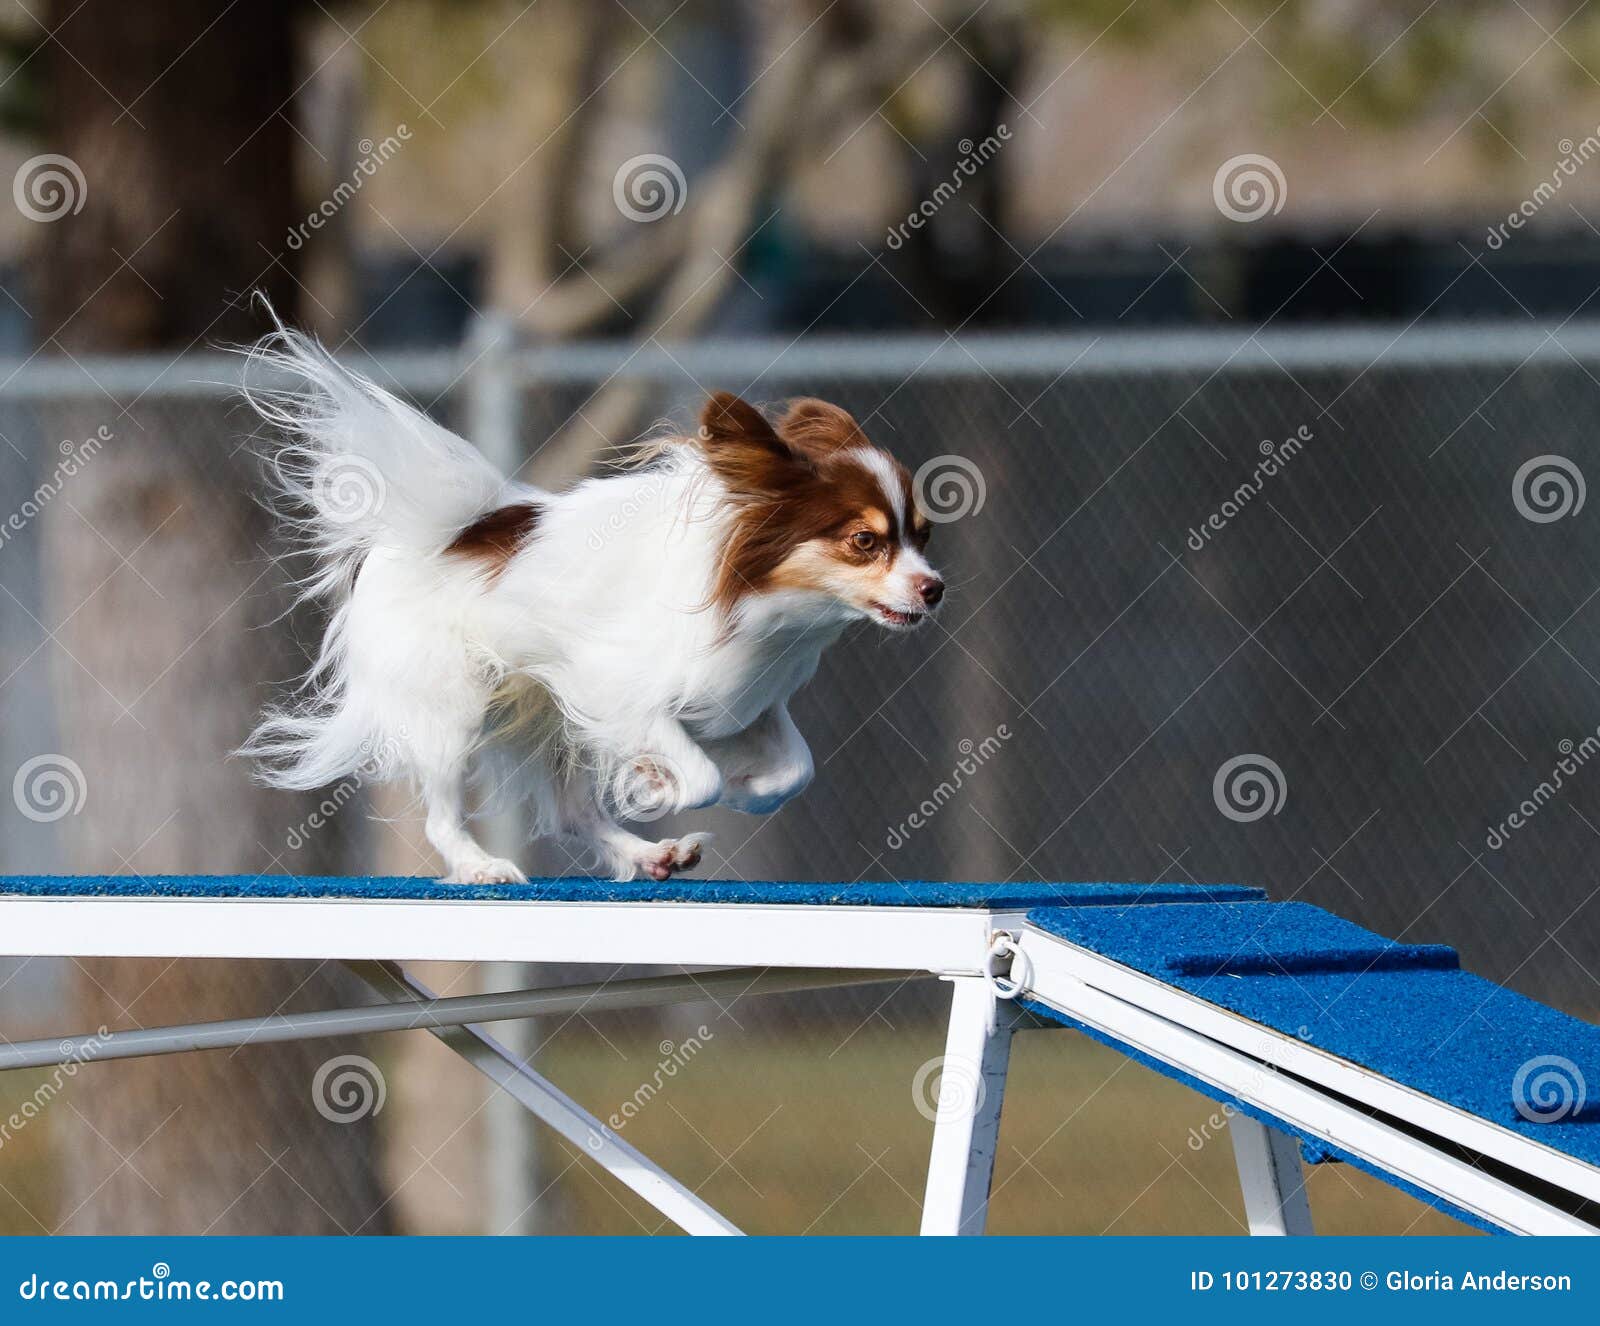 Small Dog On The Dog Walk In Agility Stock Photo Image Of Jump Happy 101273830